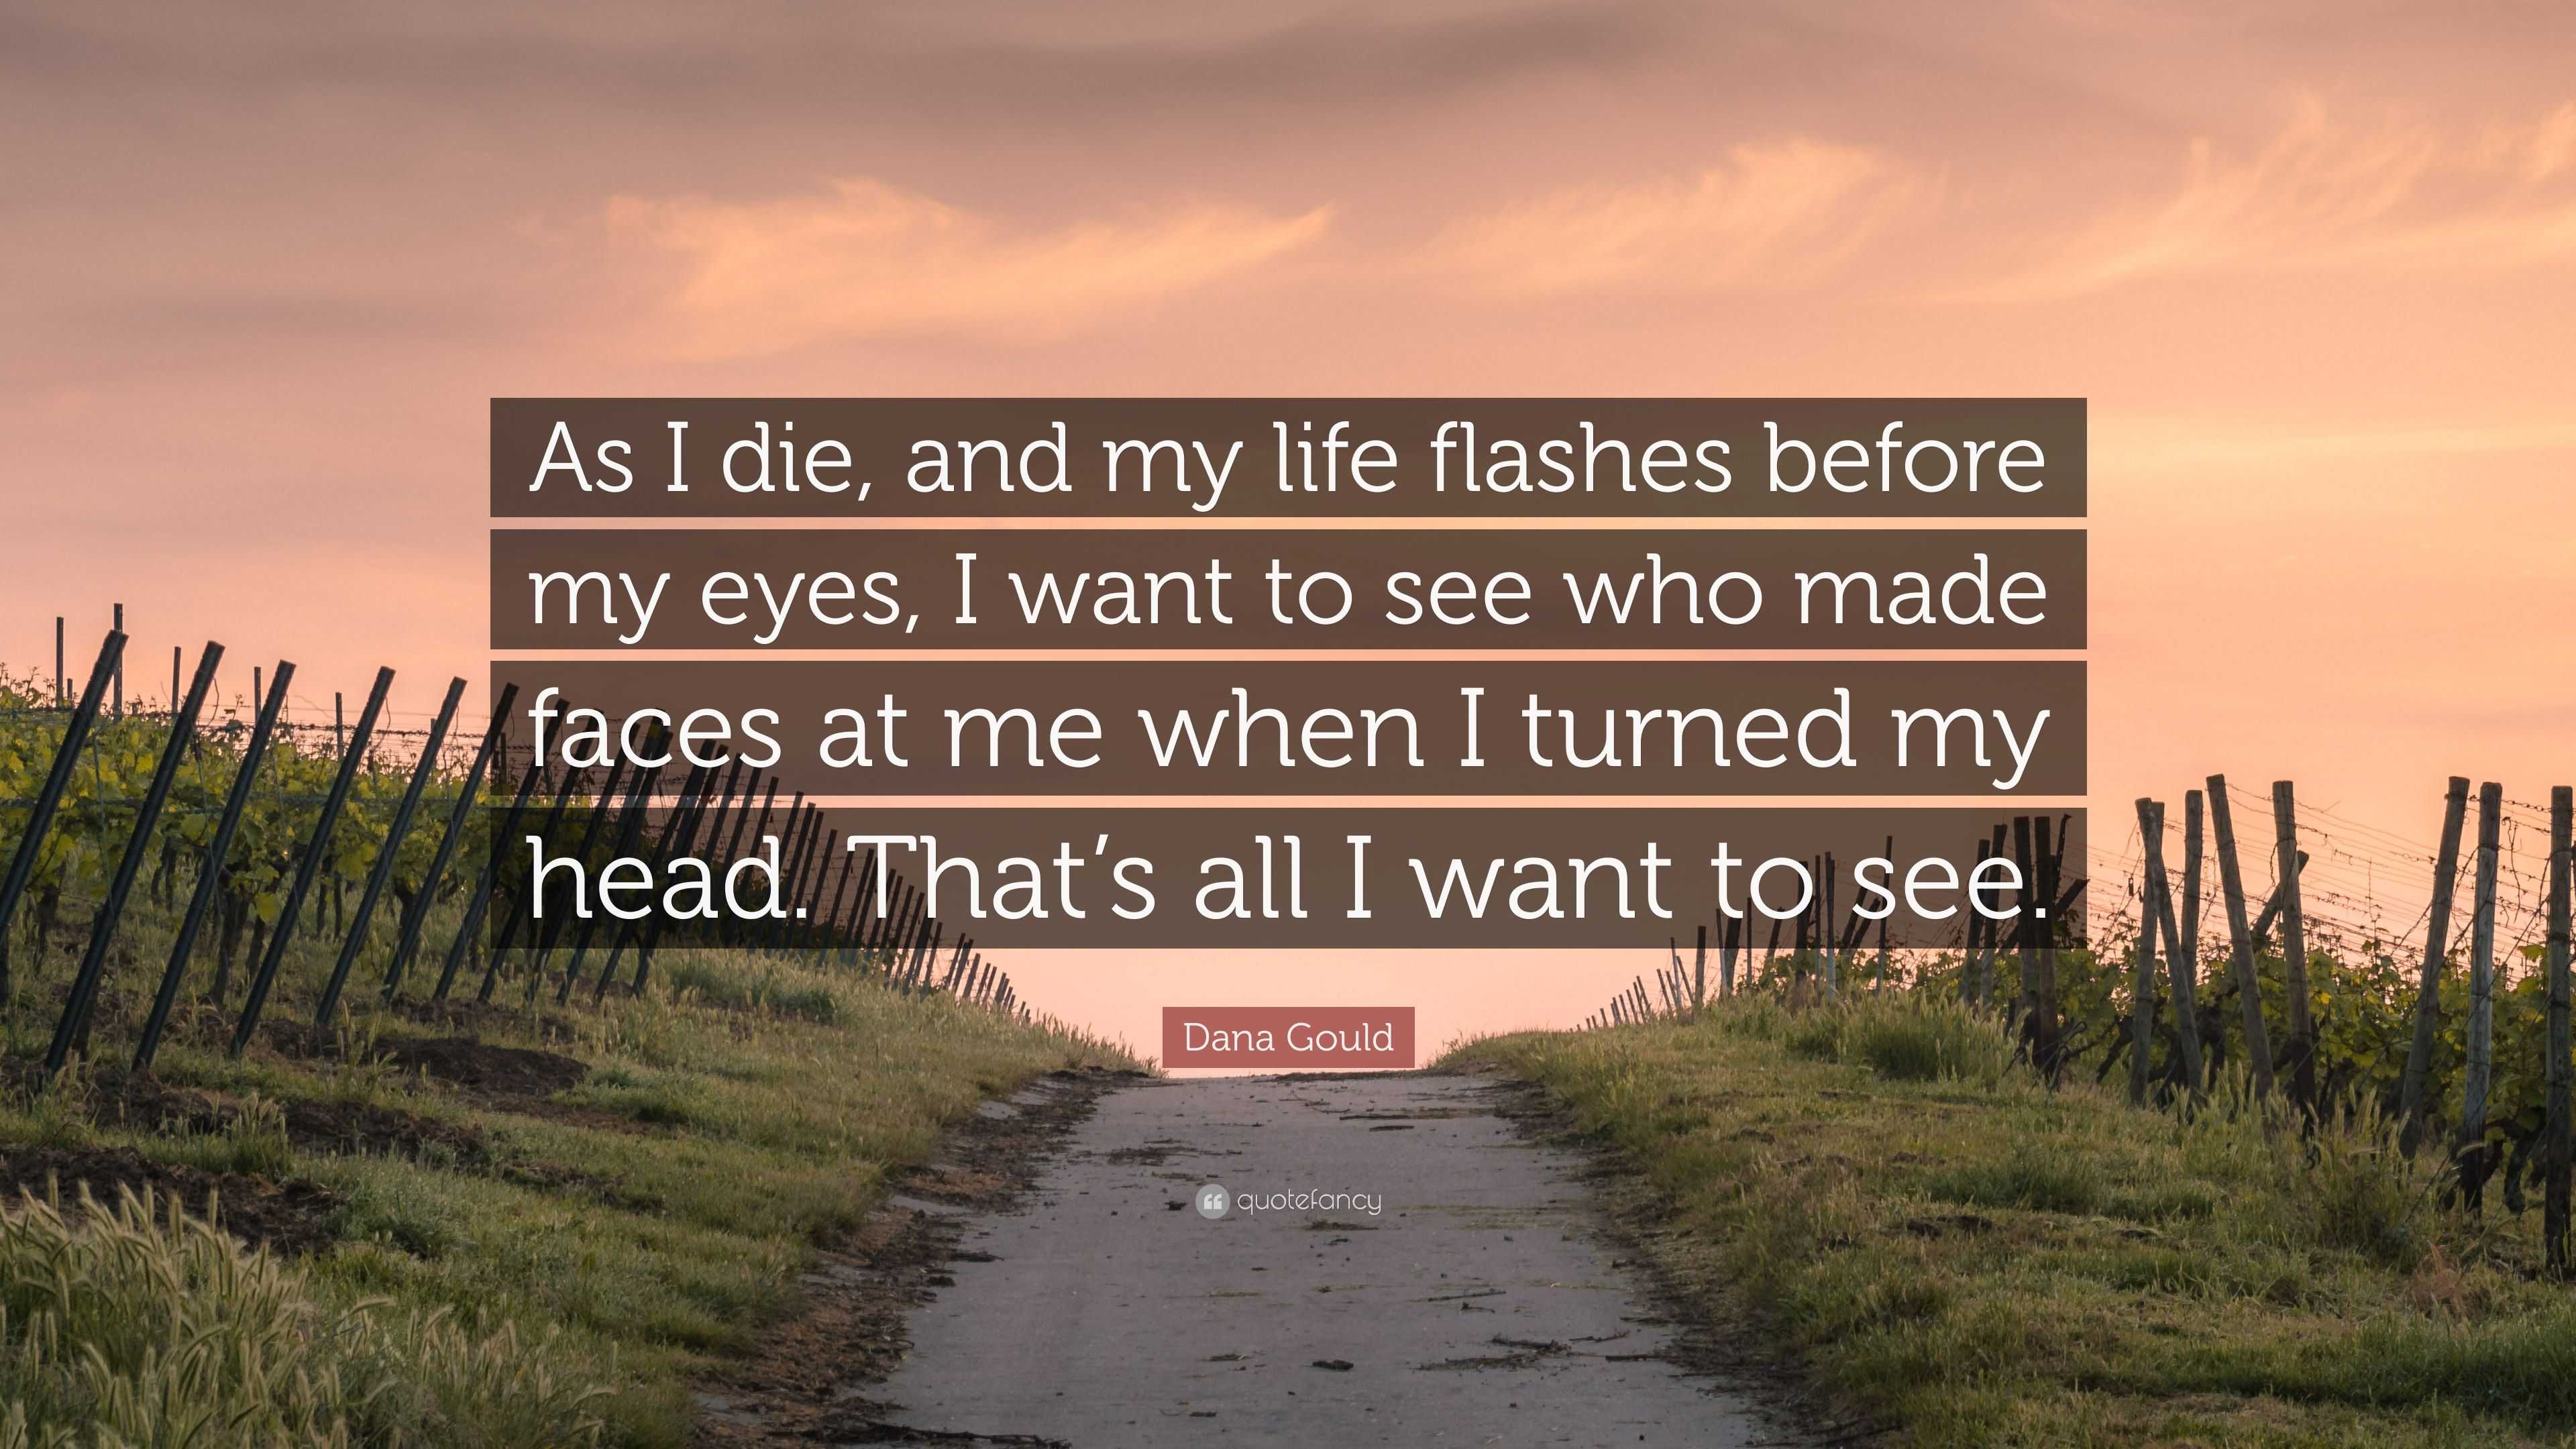 Dana Gould Quote: “As I die, and my life flashes before my eyes, I